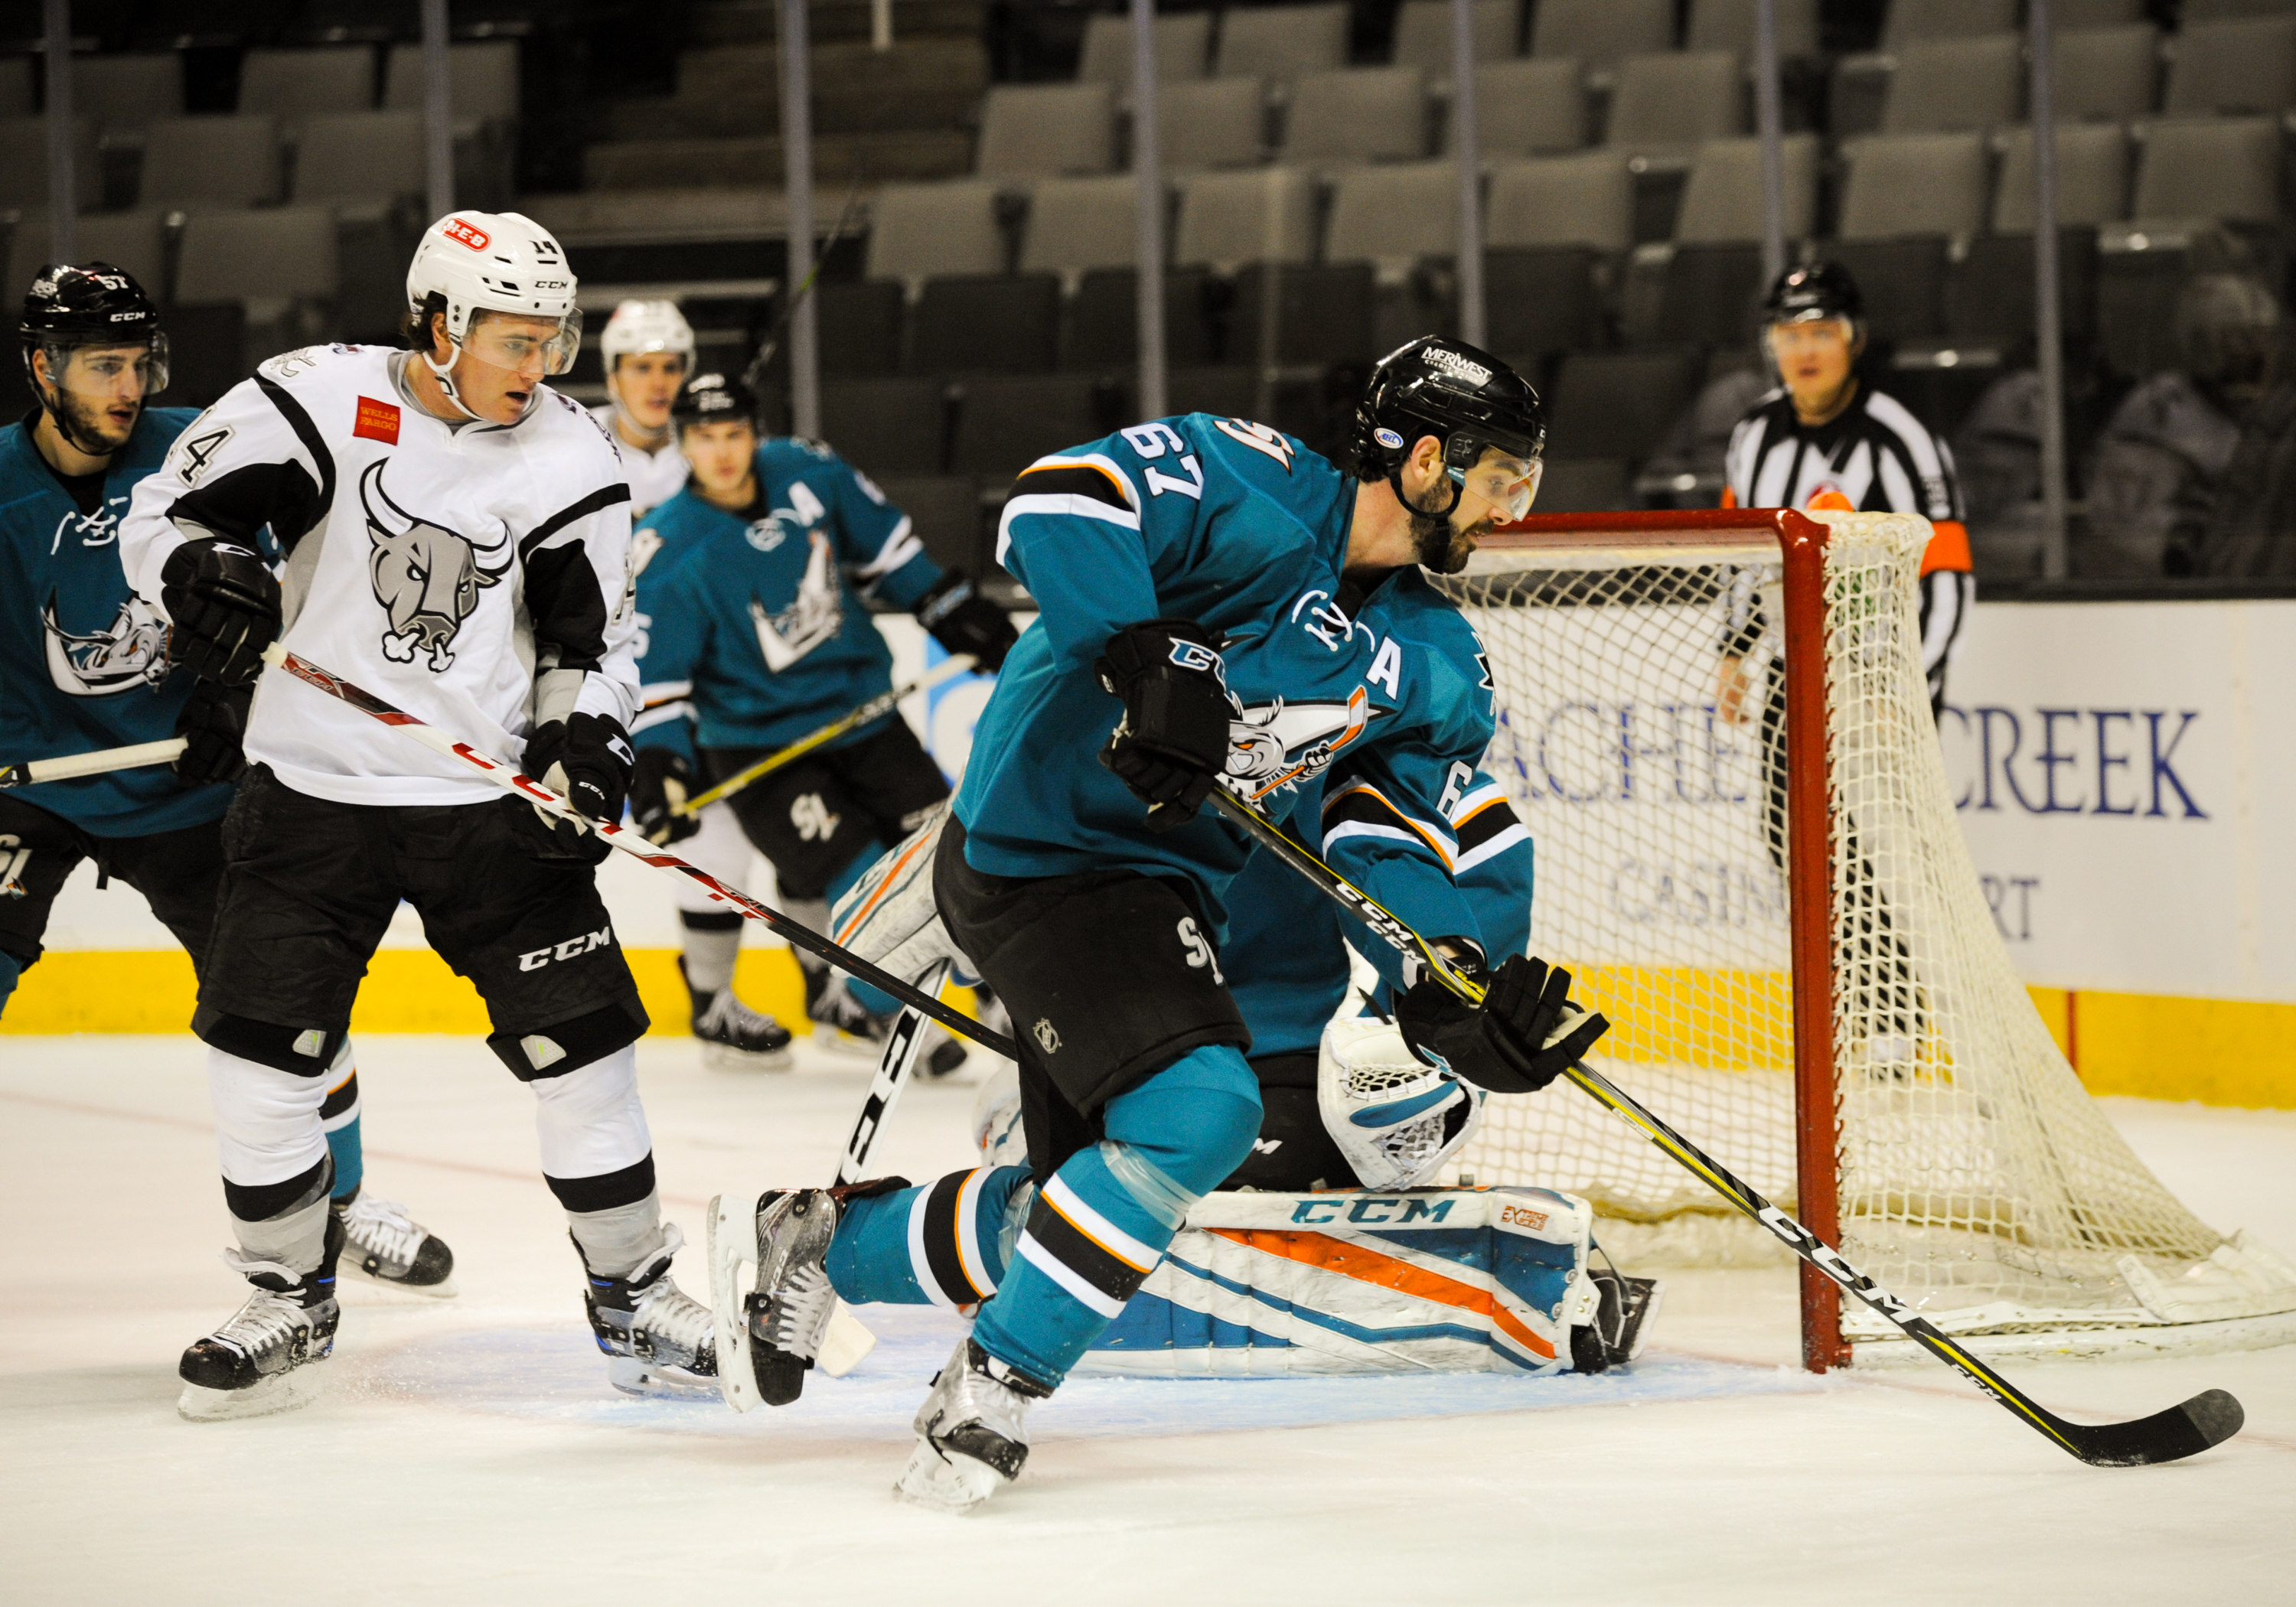 San Jose Barracuda defenseman Jacob Middleton (67) skates with the puck to draw the defending player away from the net during the regular season game between the San Jose Barracuda and the San Antonio Rampage on January 9, 2017 at SAP Center in San Jose, CA&nbsp;